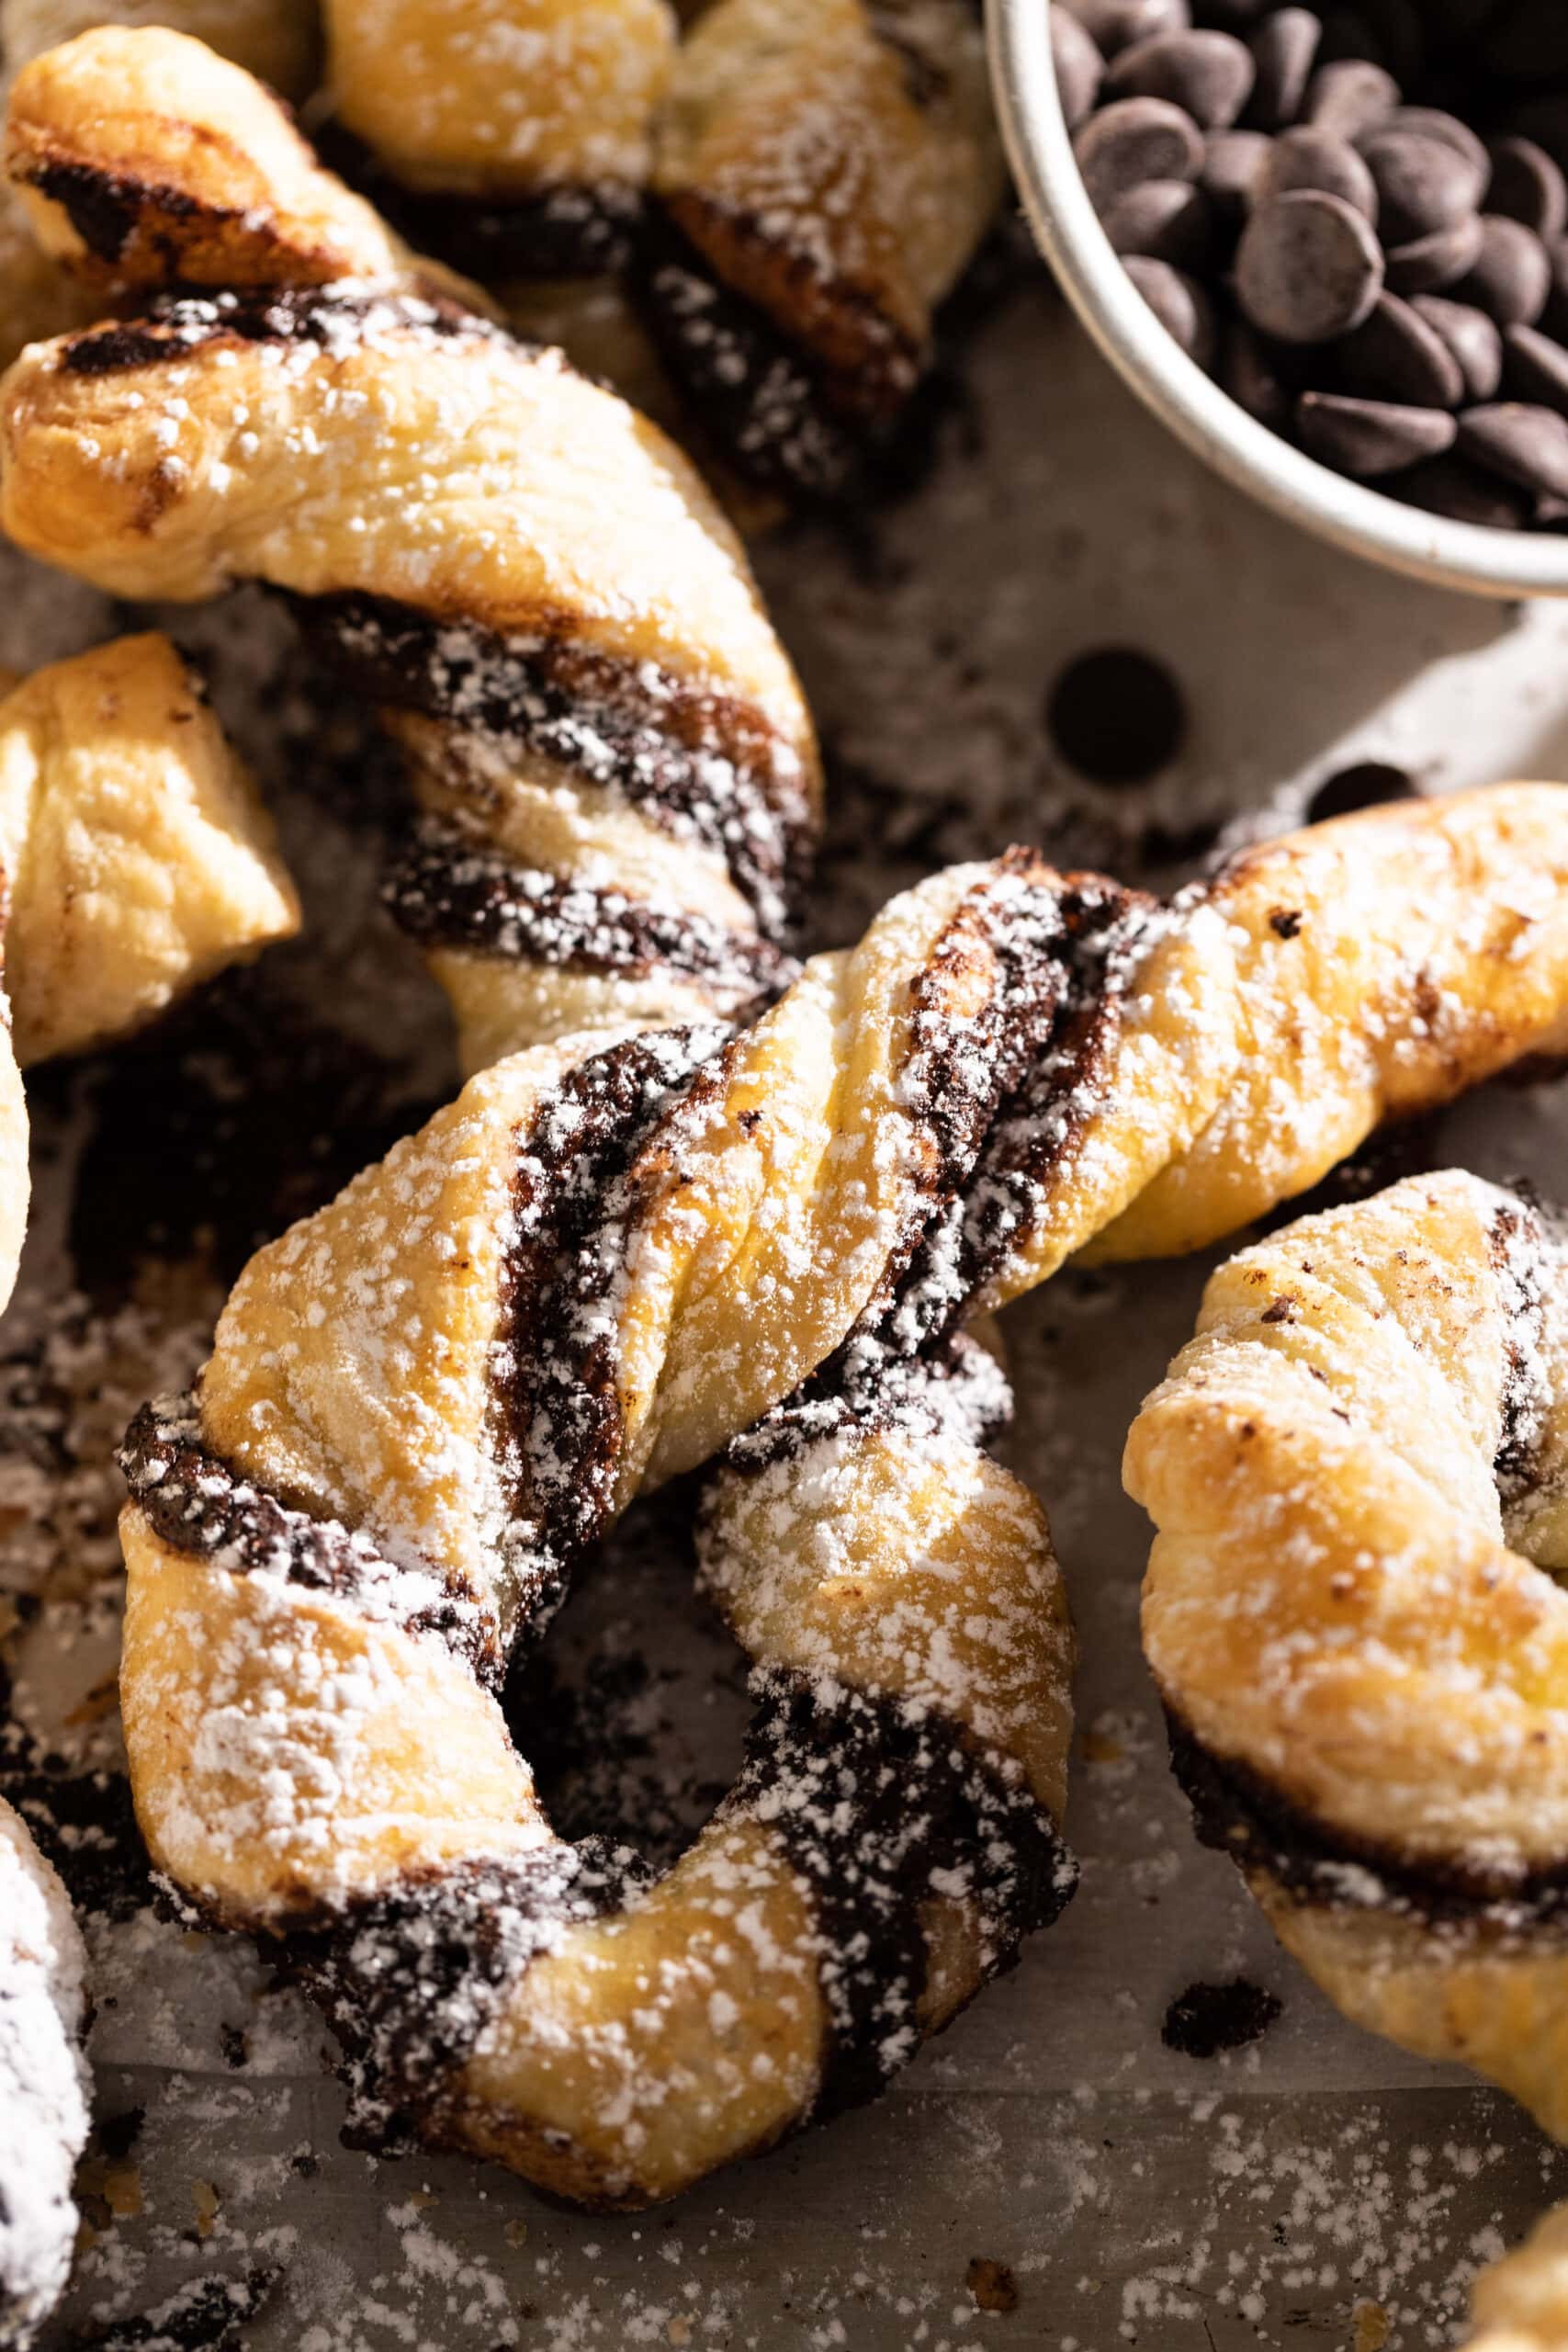 Up close image of a chocolate pastry twist dusted with powdered sugar.